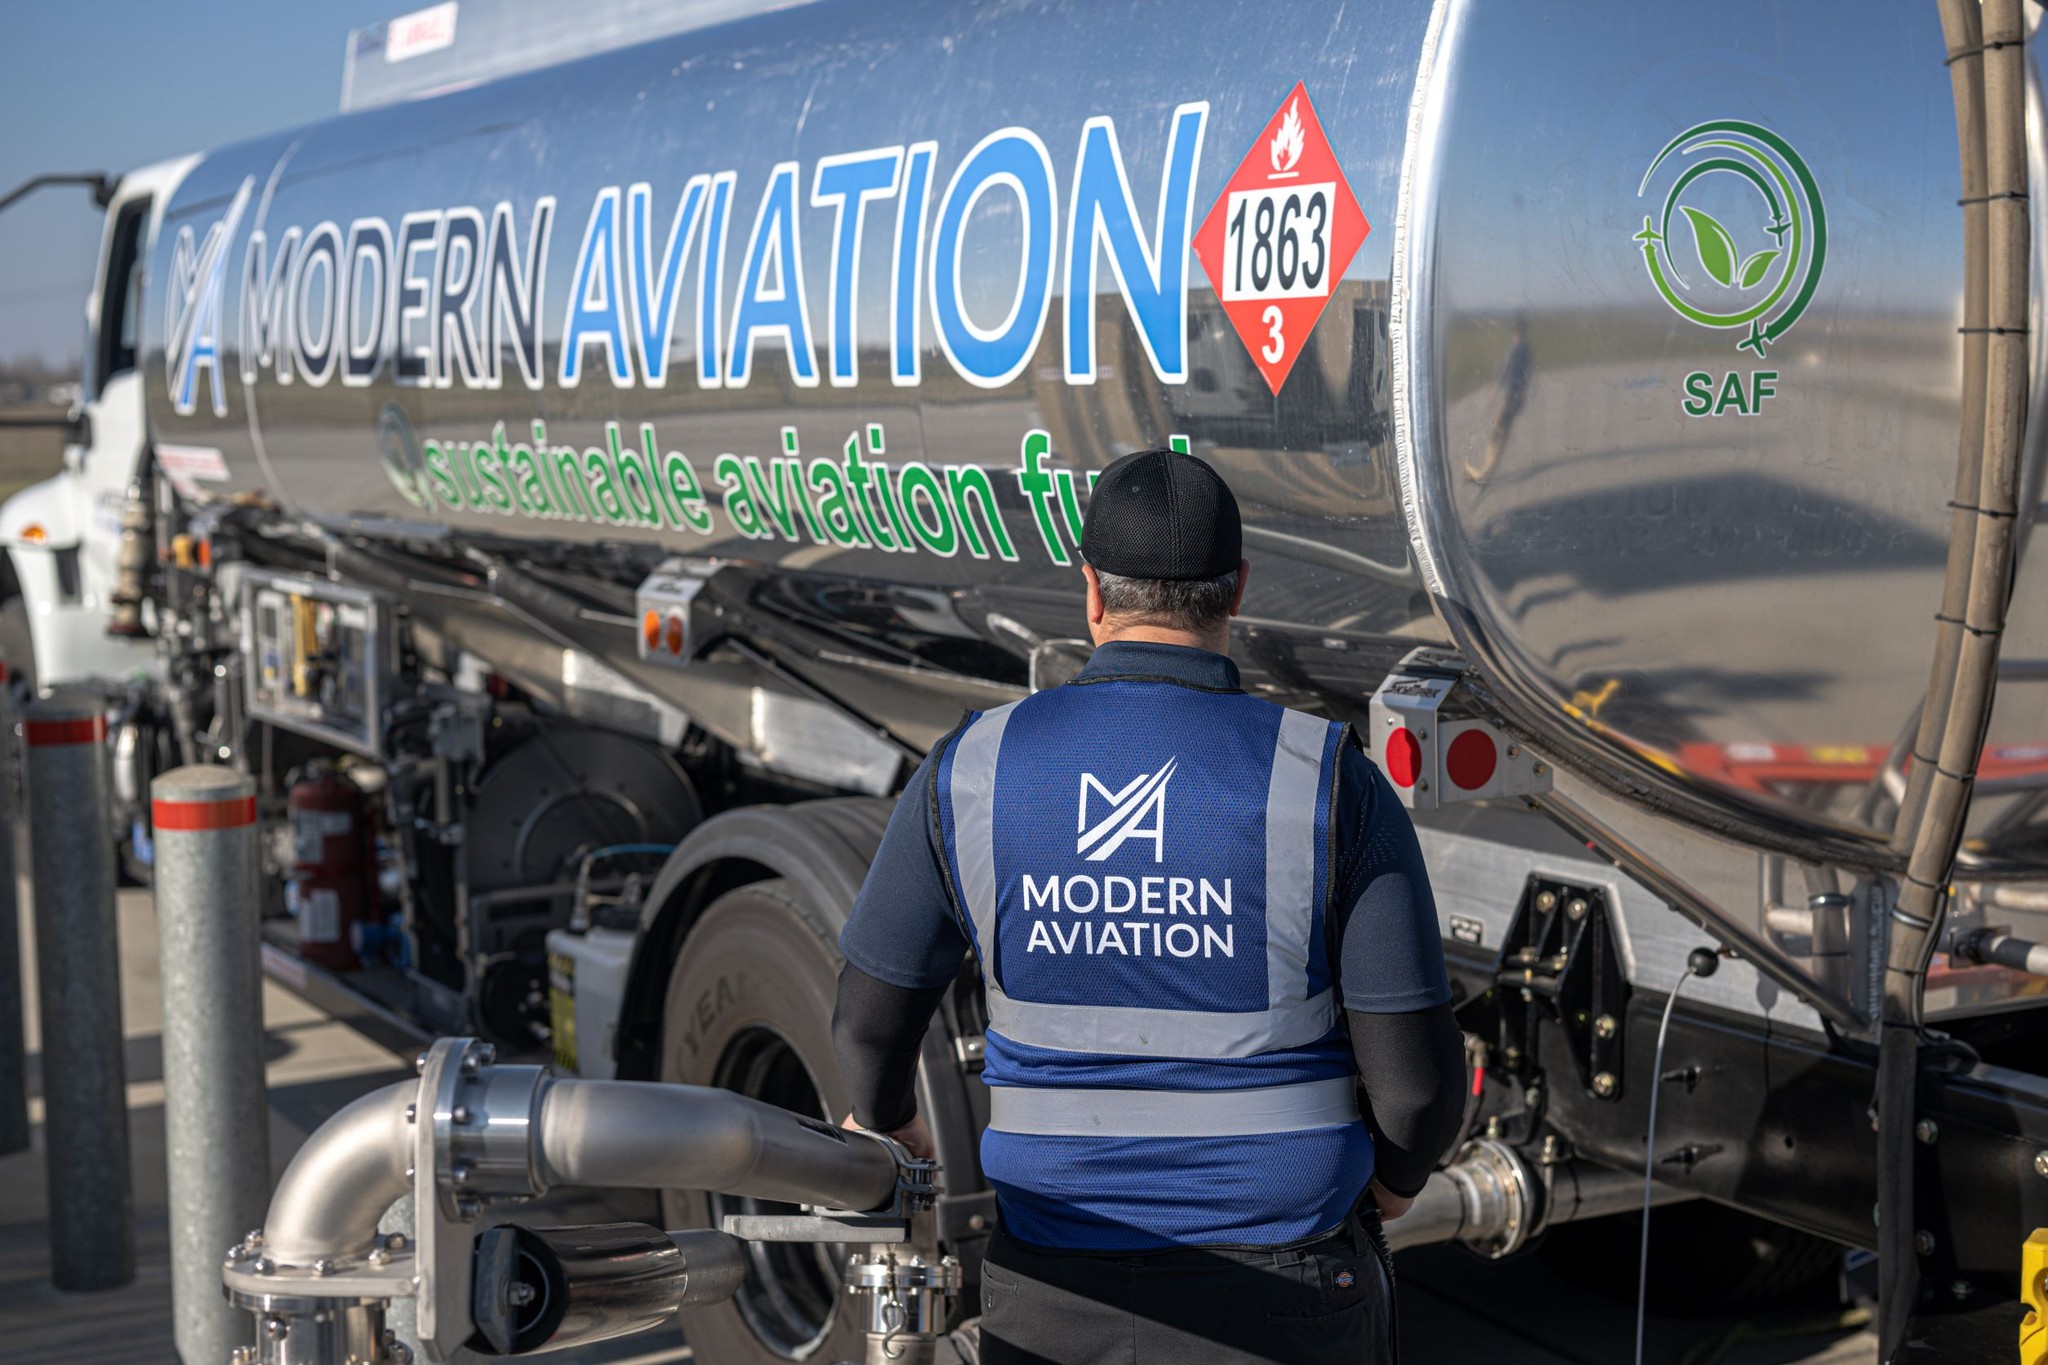 Modern Aviation bought by Apollo Infrastructure